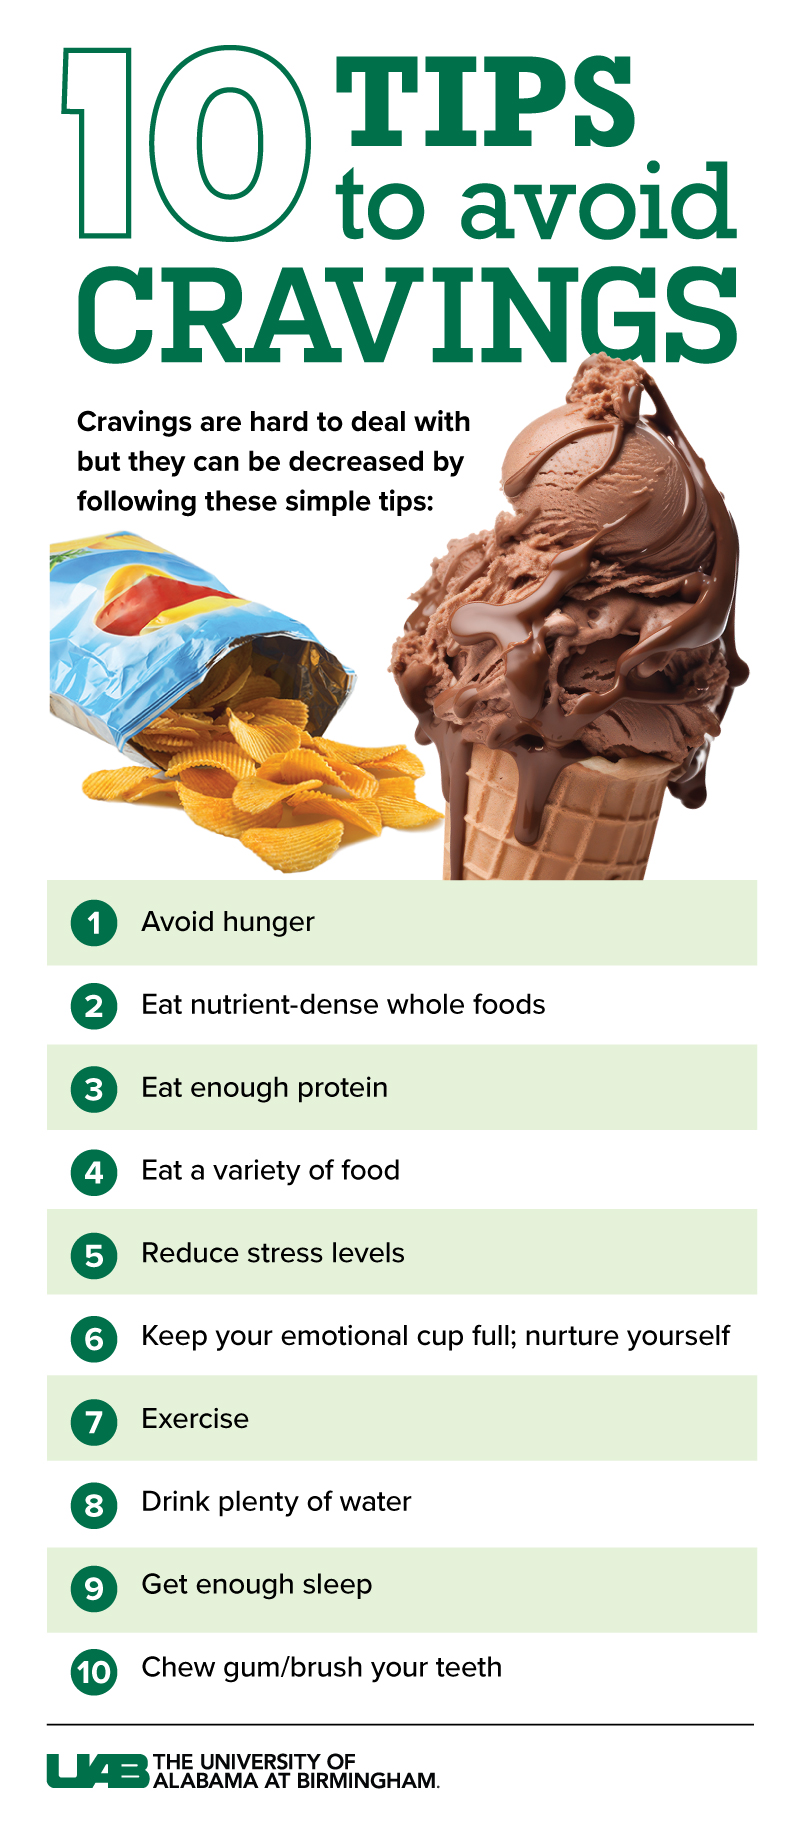 Find out what to eat at each meal to curb your cravings in just three days.